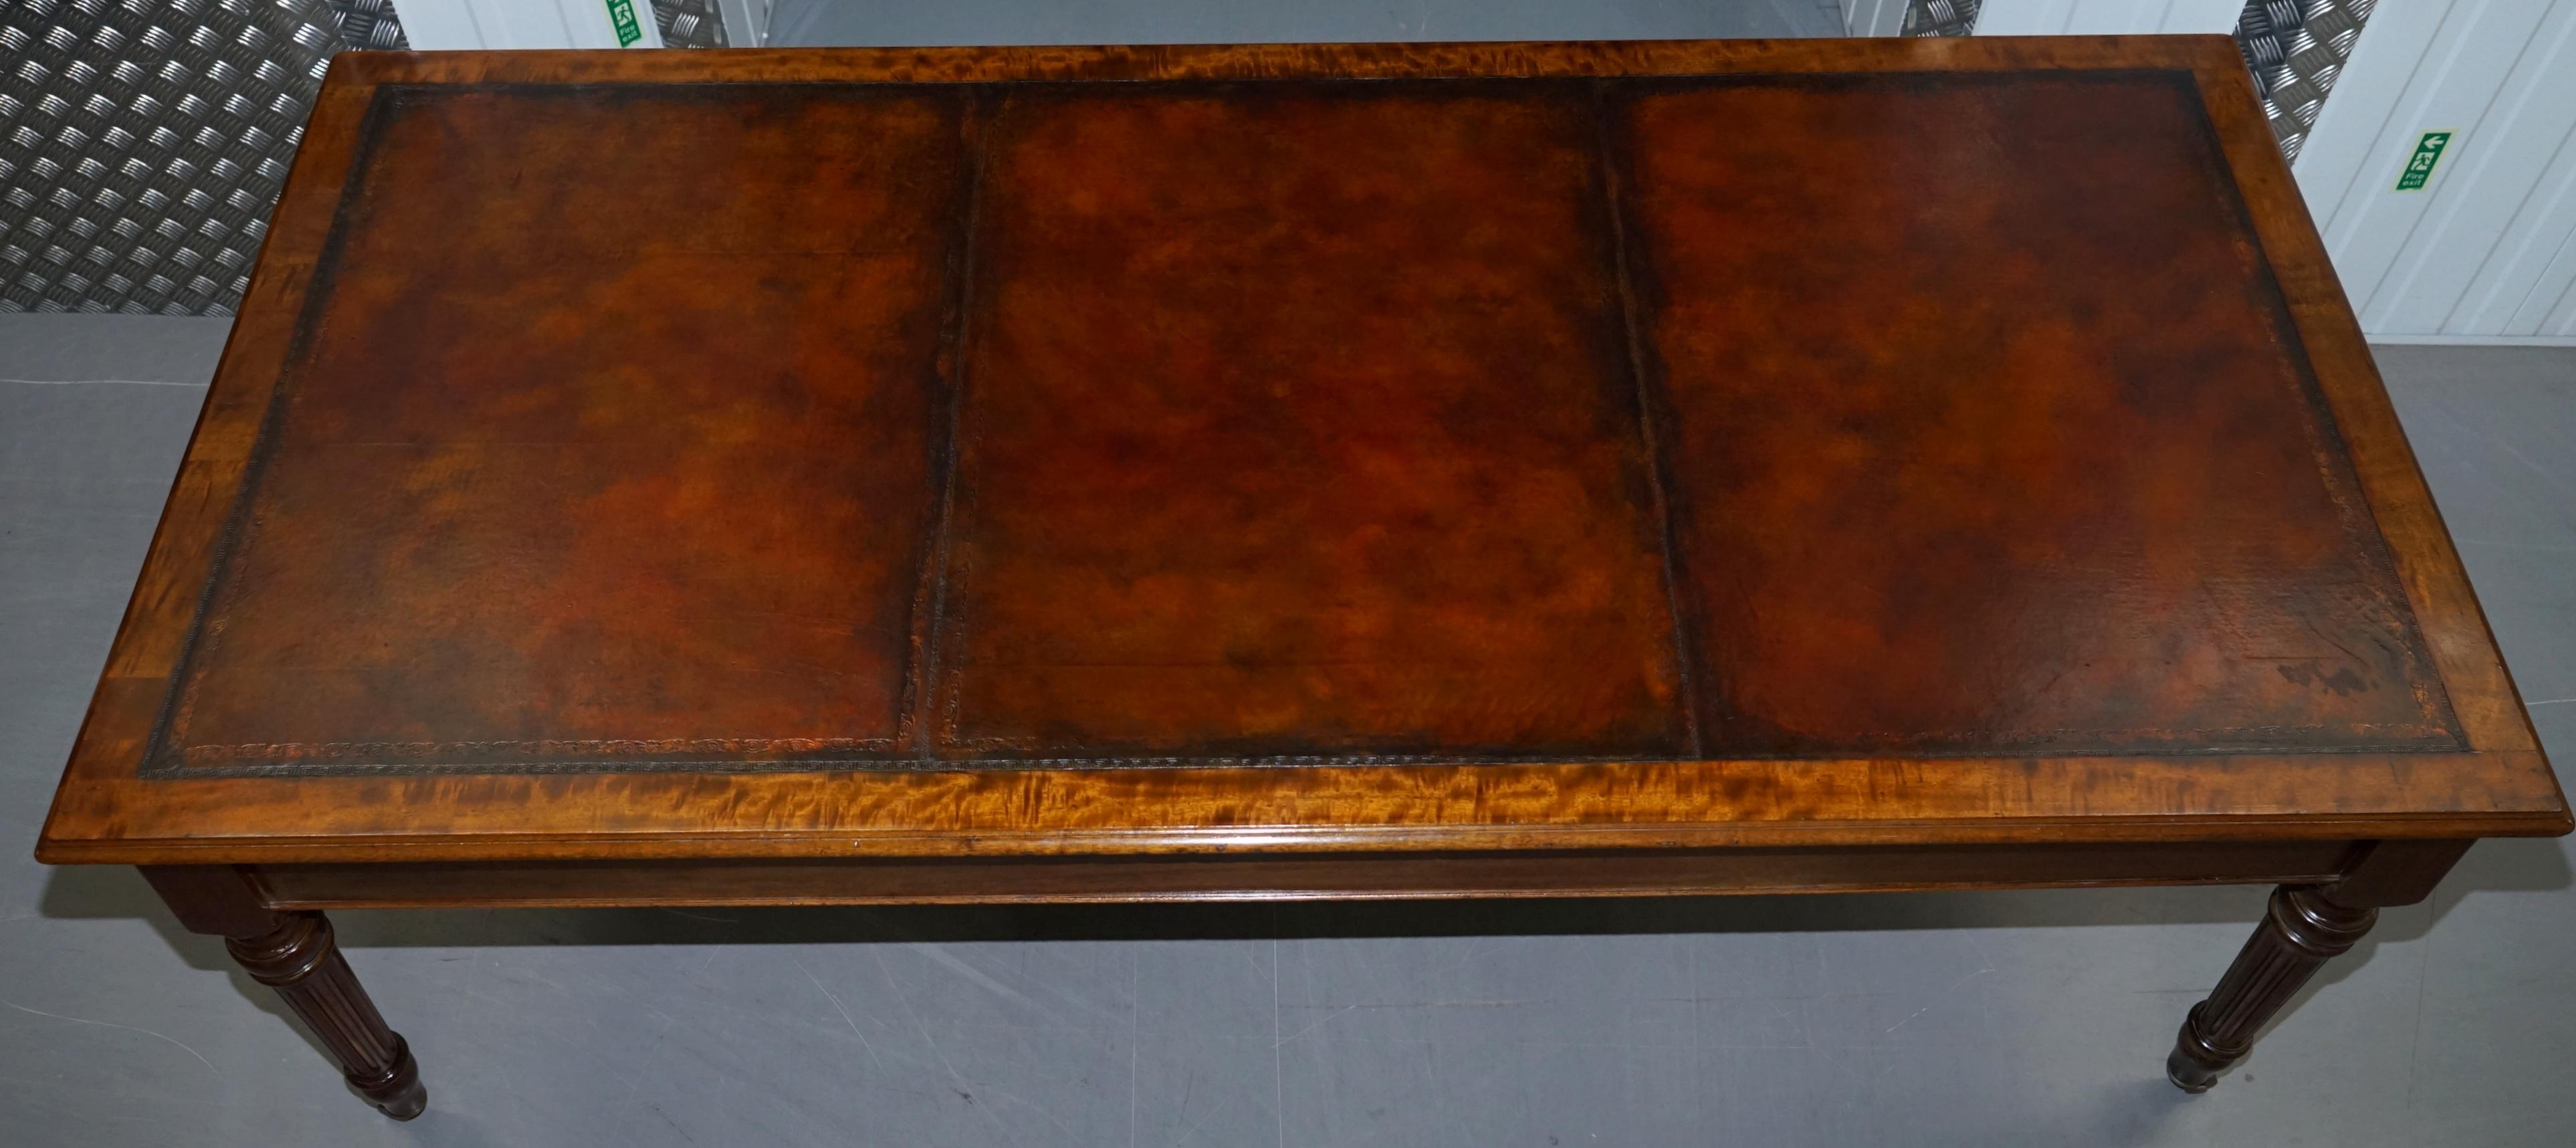 Hand-Crafted Huge Restored Victorian Refectory Library Dining Table Brown Leather Top Gillows